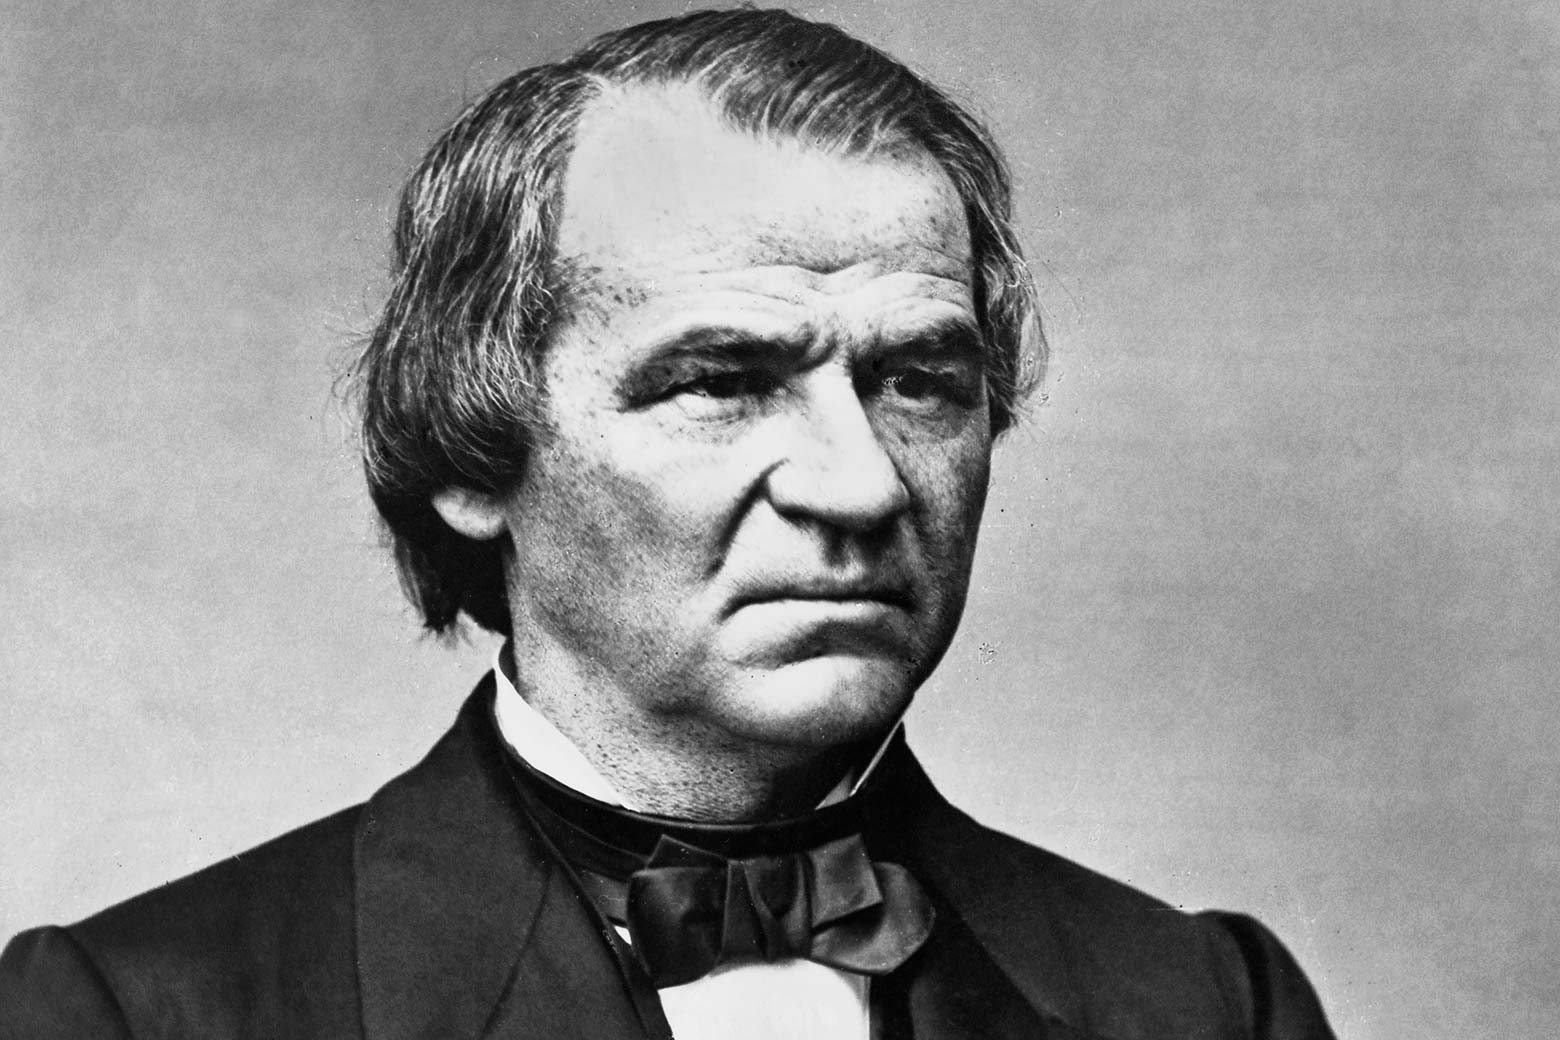 A portrait of Andrew Johnson in 1865.